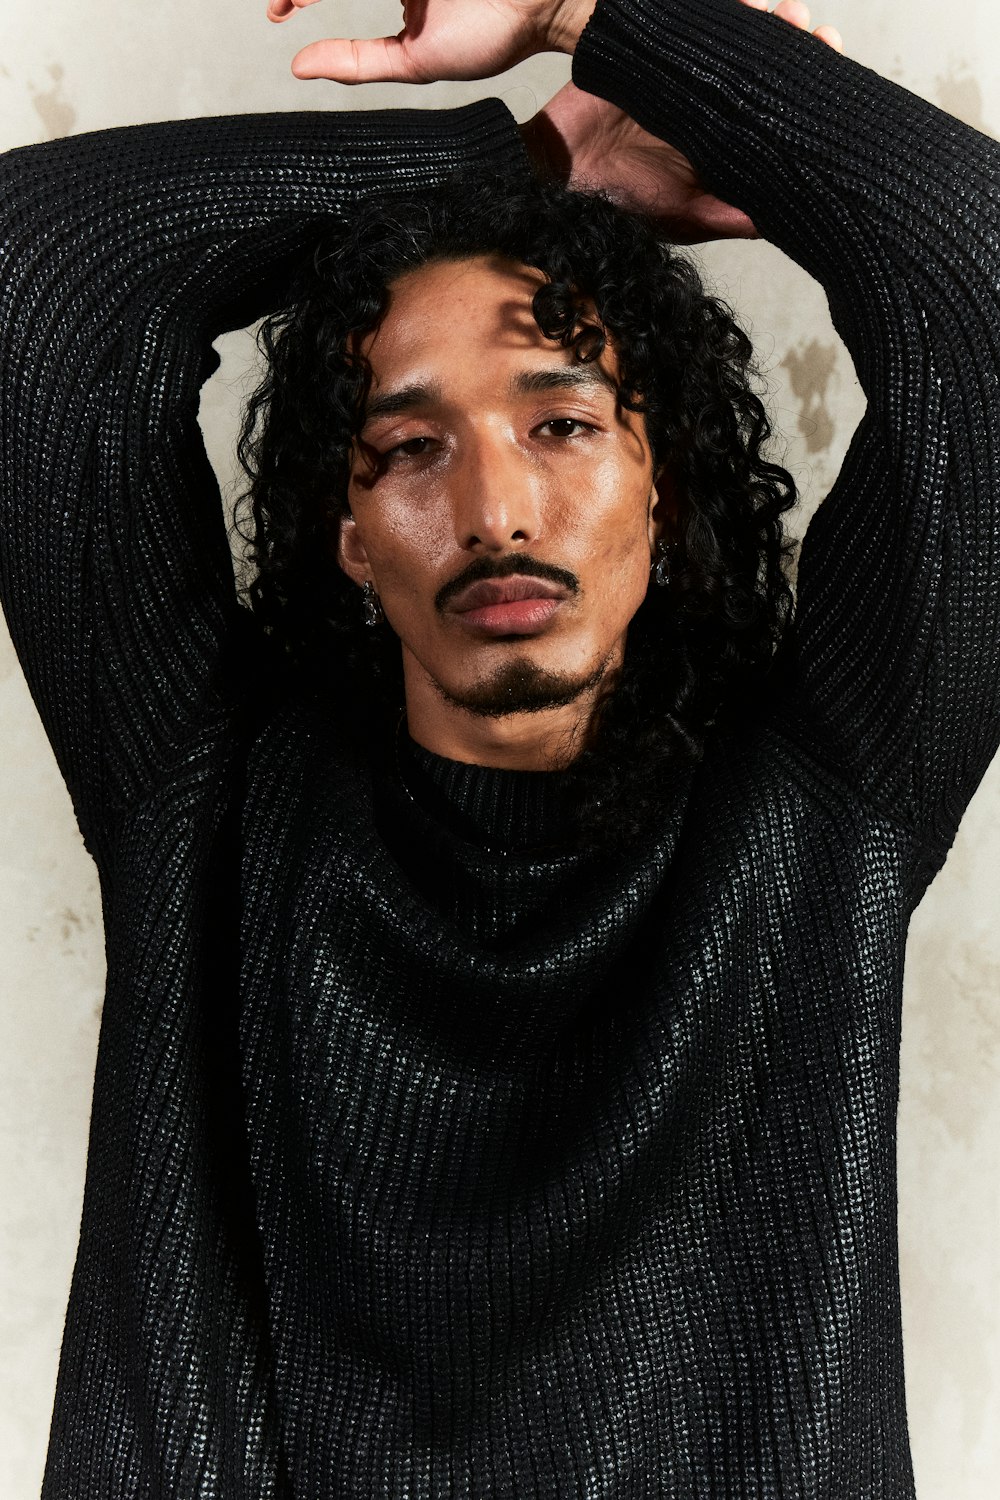 a man with curly hair and a black sweater